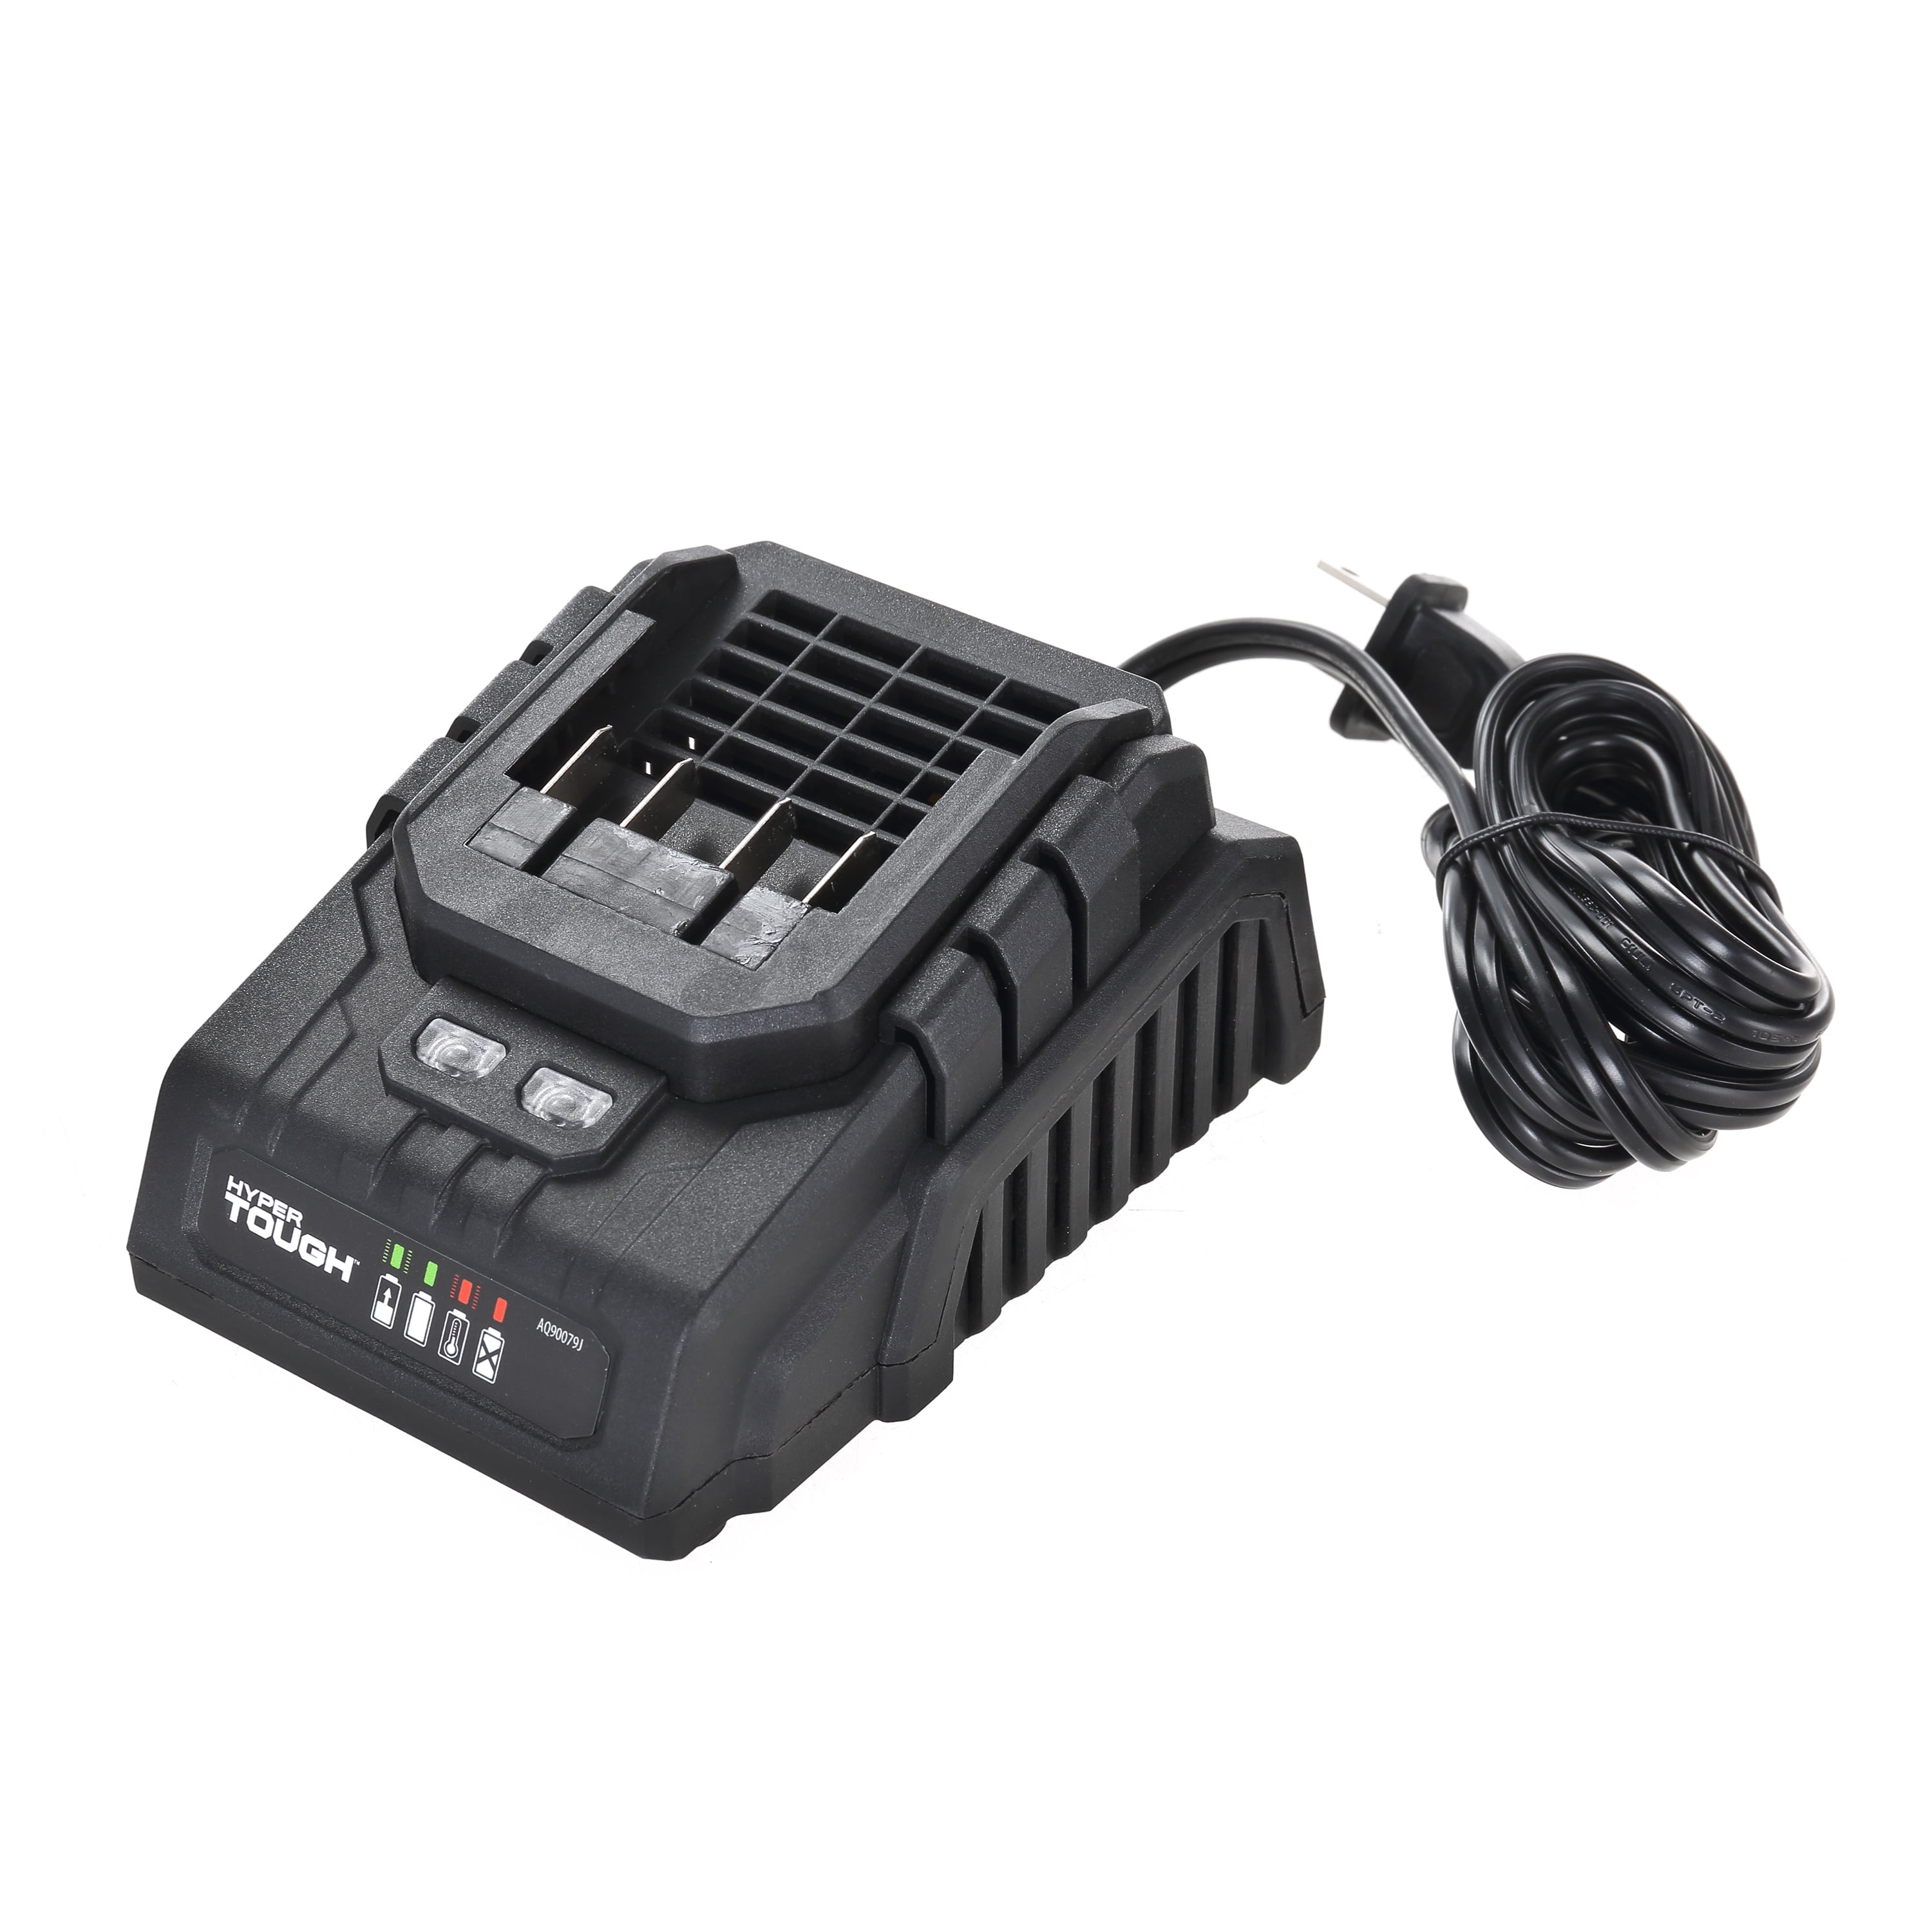 New Max Hyper Tough 20V Max Lithium ion Battery Charger Charge 20 Volt HT Tools 